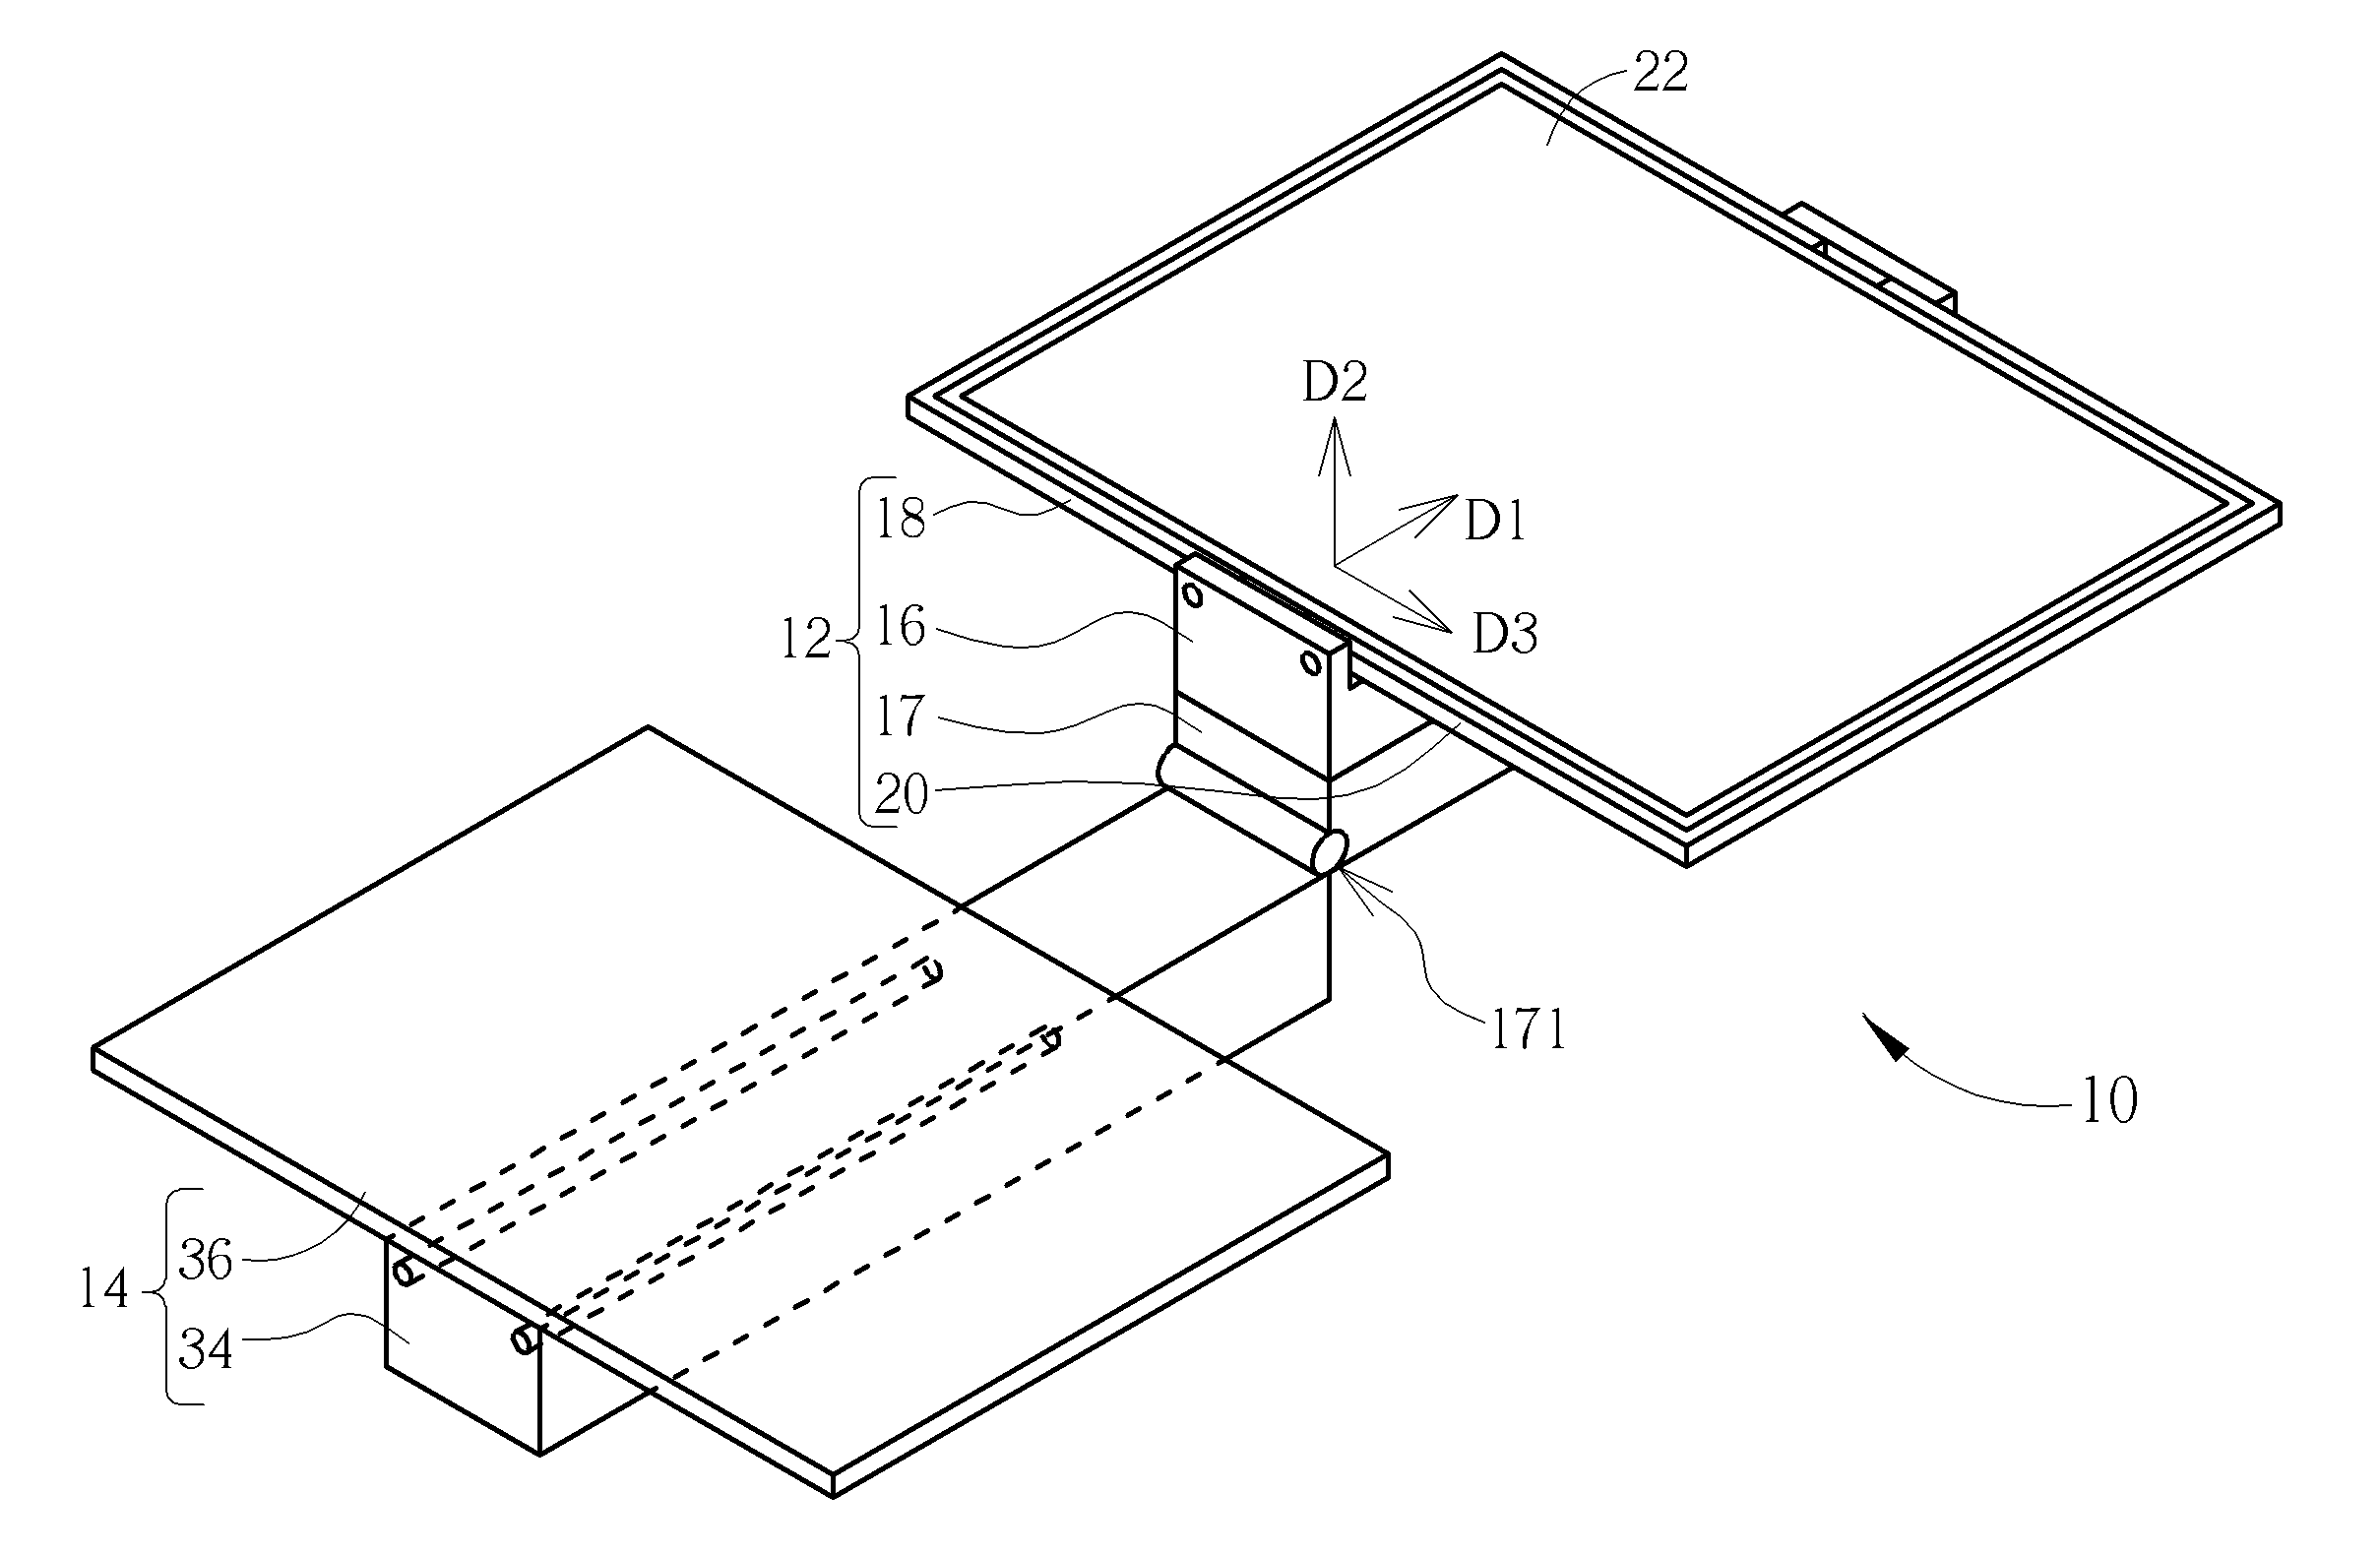 Electronic device with a fold mode and an unfold mode